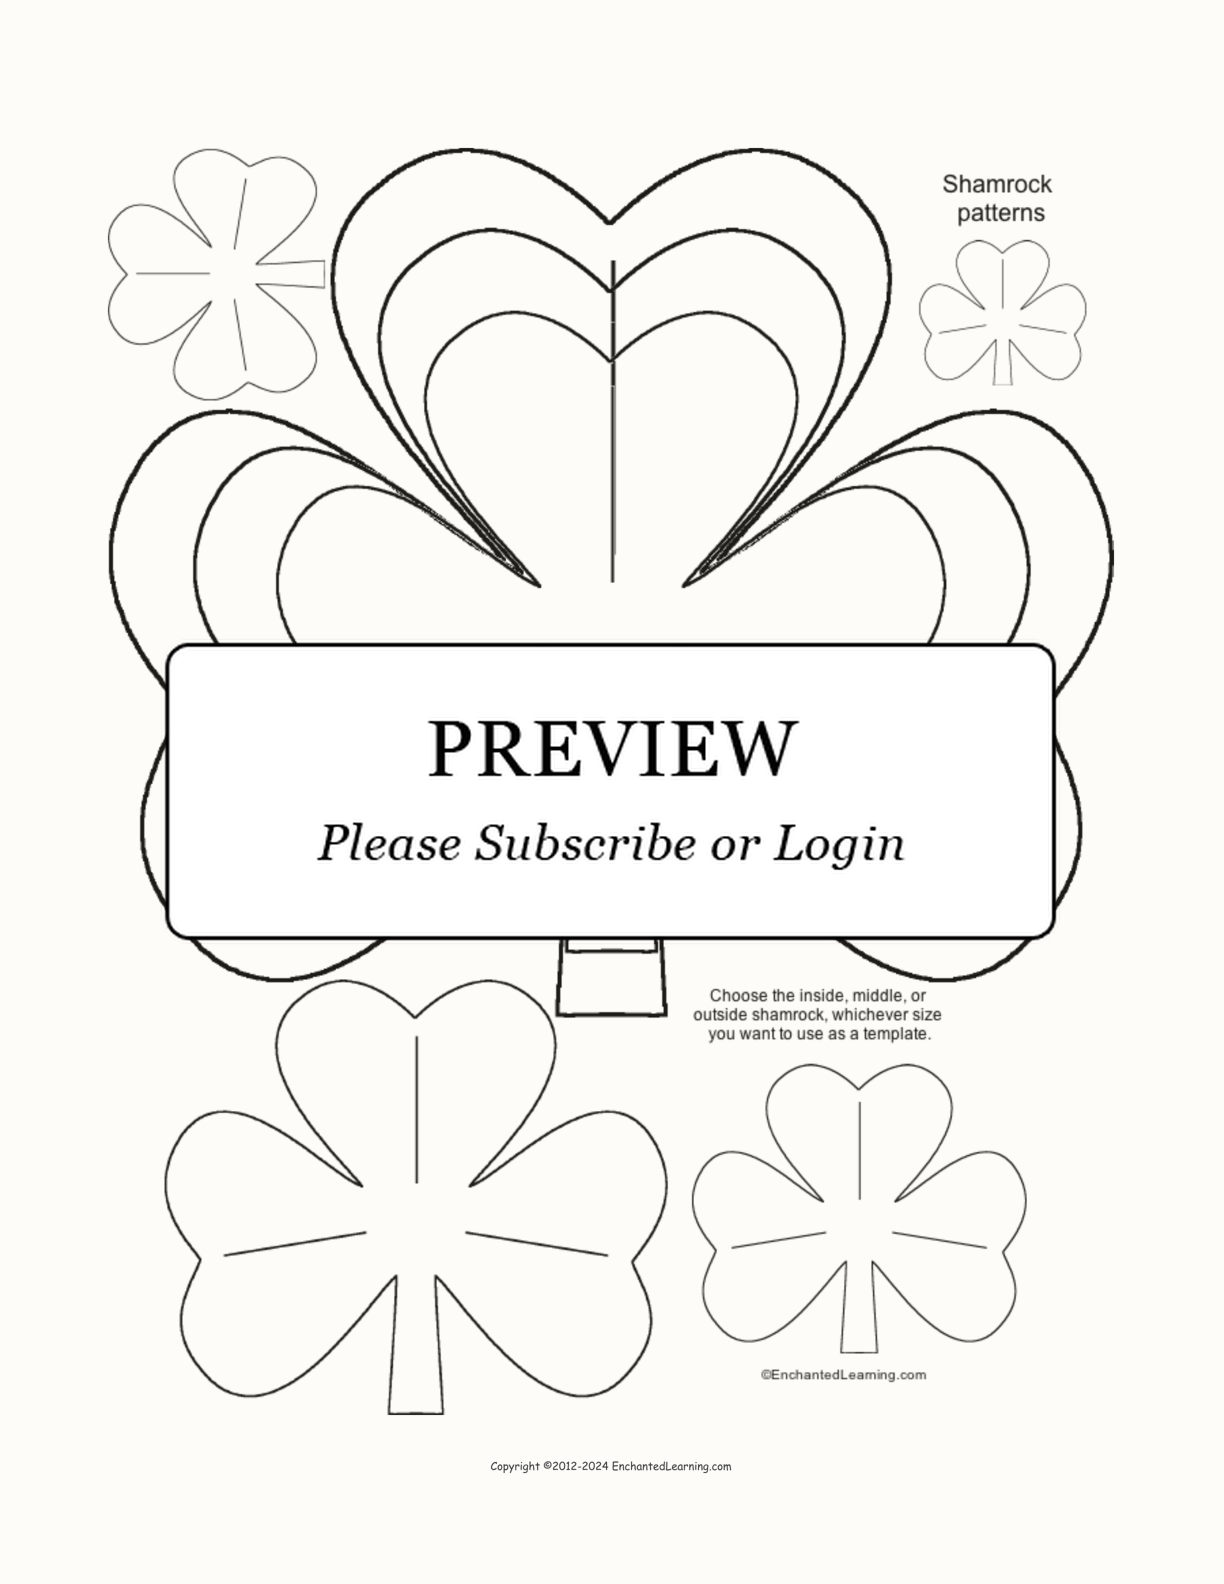 Multi-sized Shamrock Template to Print interactive printout page 1